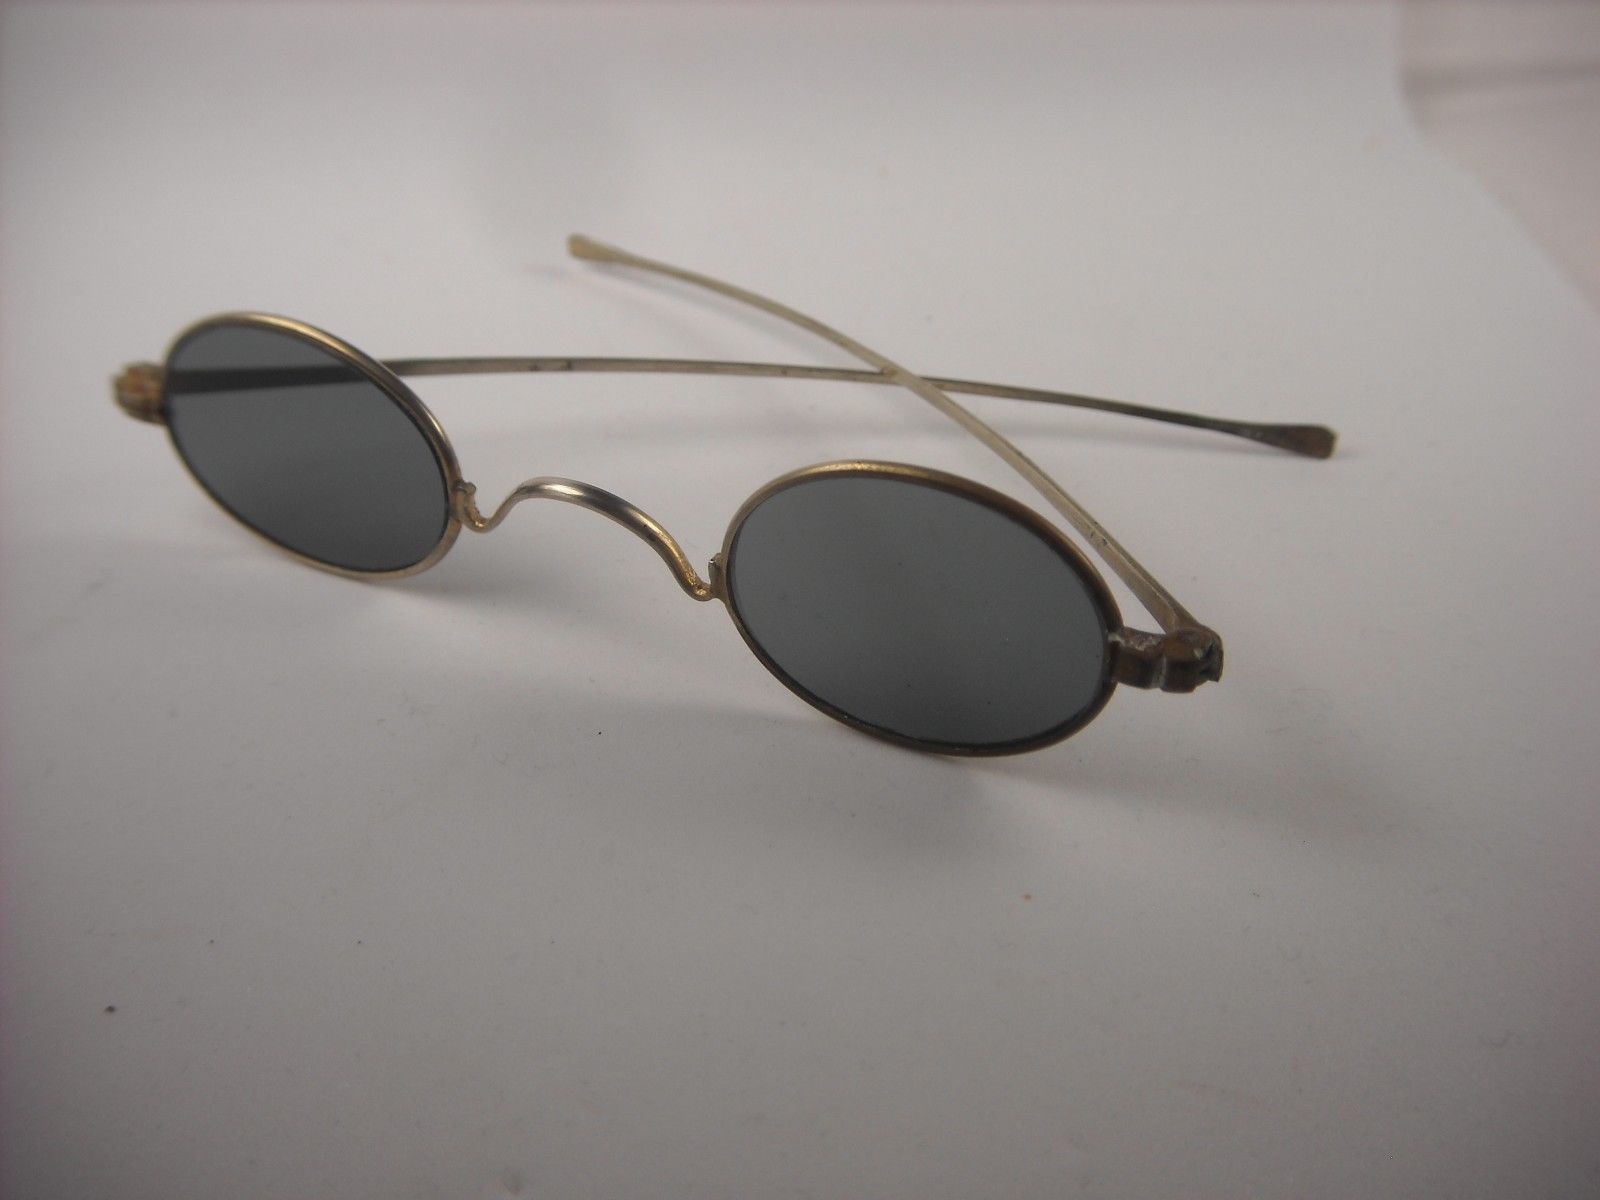 Antique eyeglasses. Sunglasses from the early 1900''s. Small spectacles ...